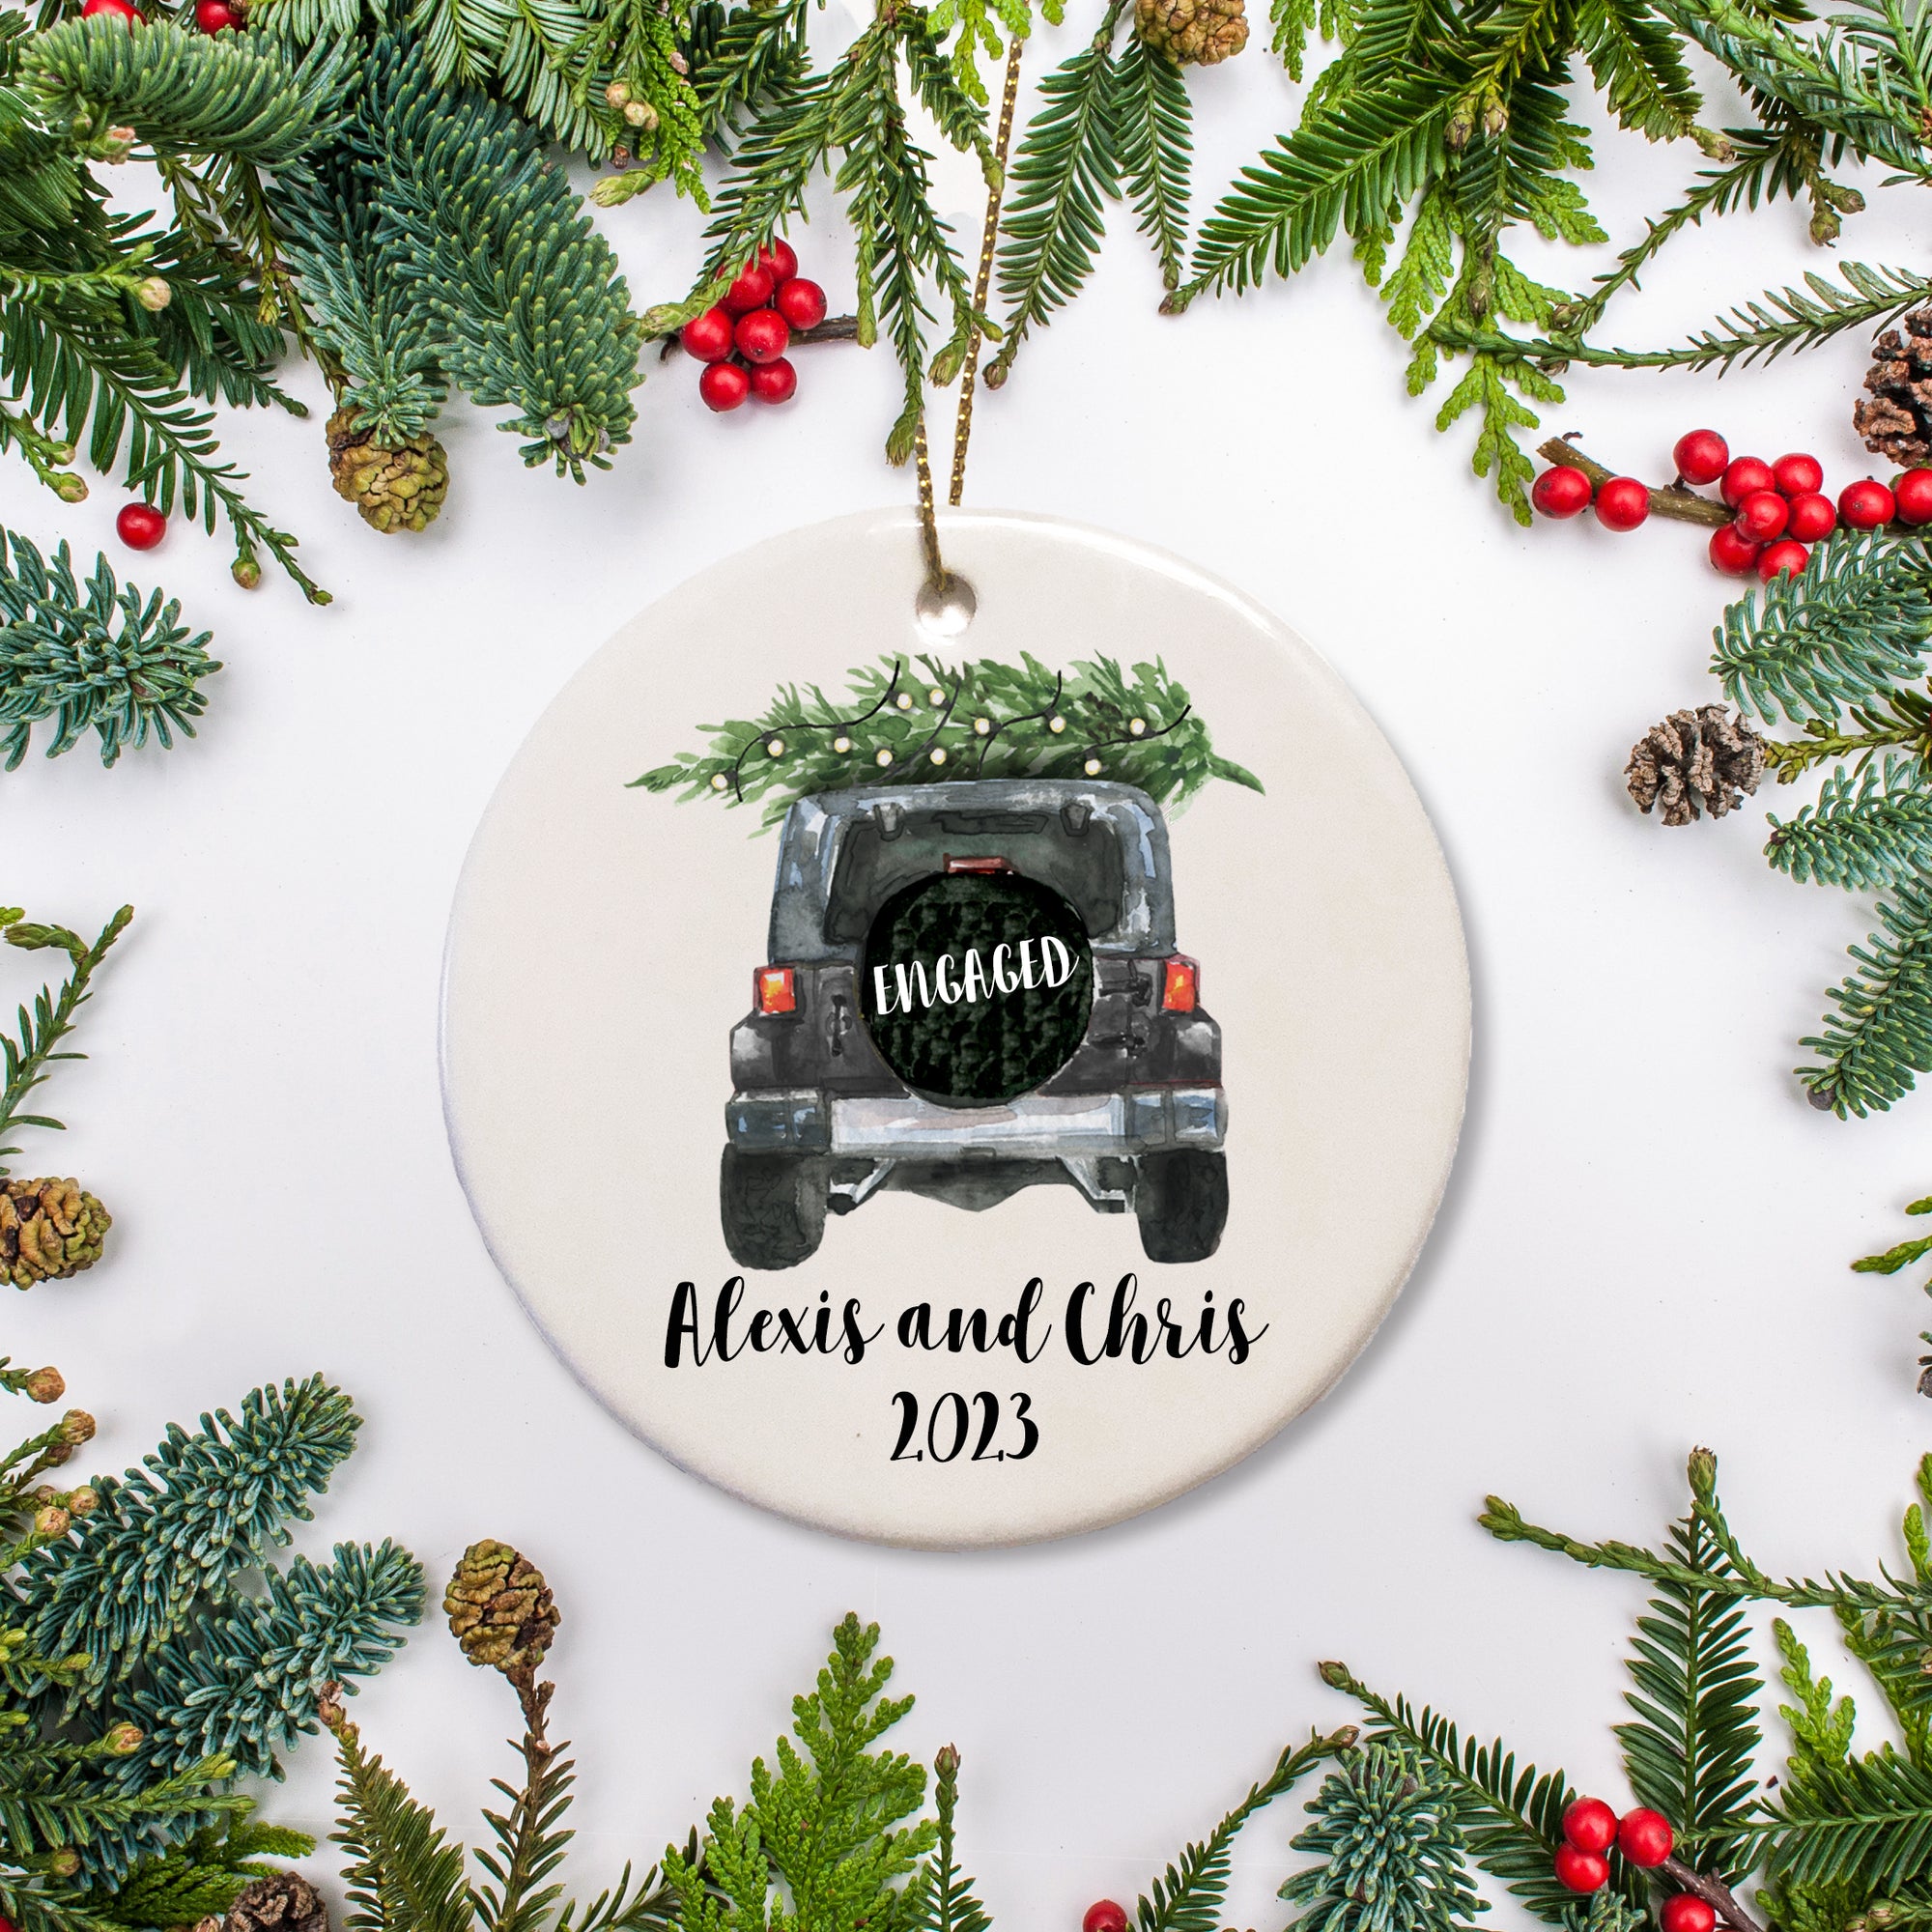 A keepsake ornament of a jeep which says “engaged” with a Christmas tree which is personalized and includes the year. The jeep is black